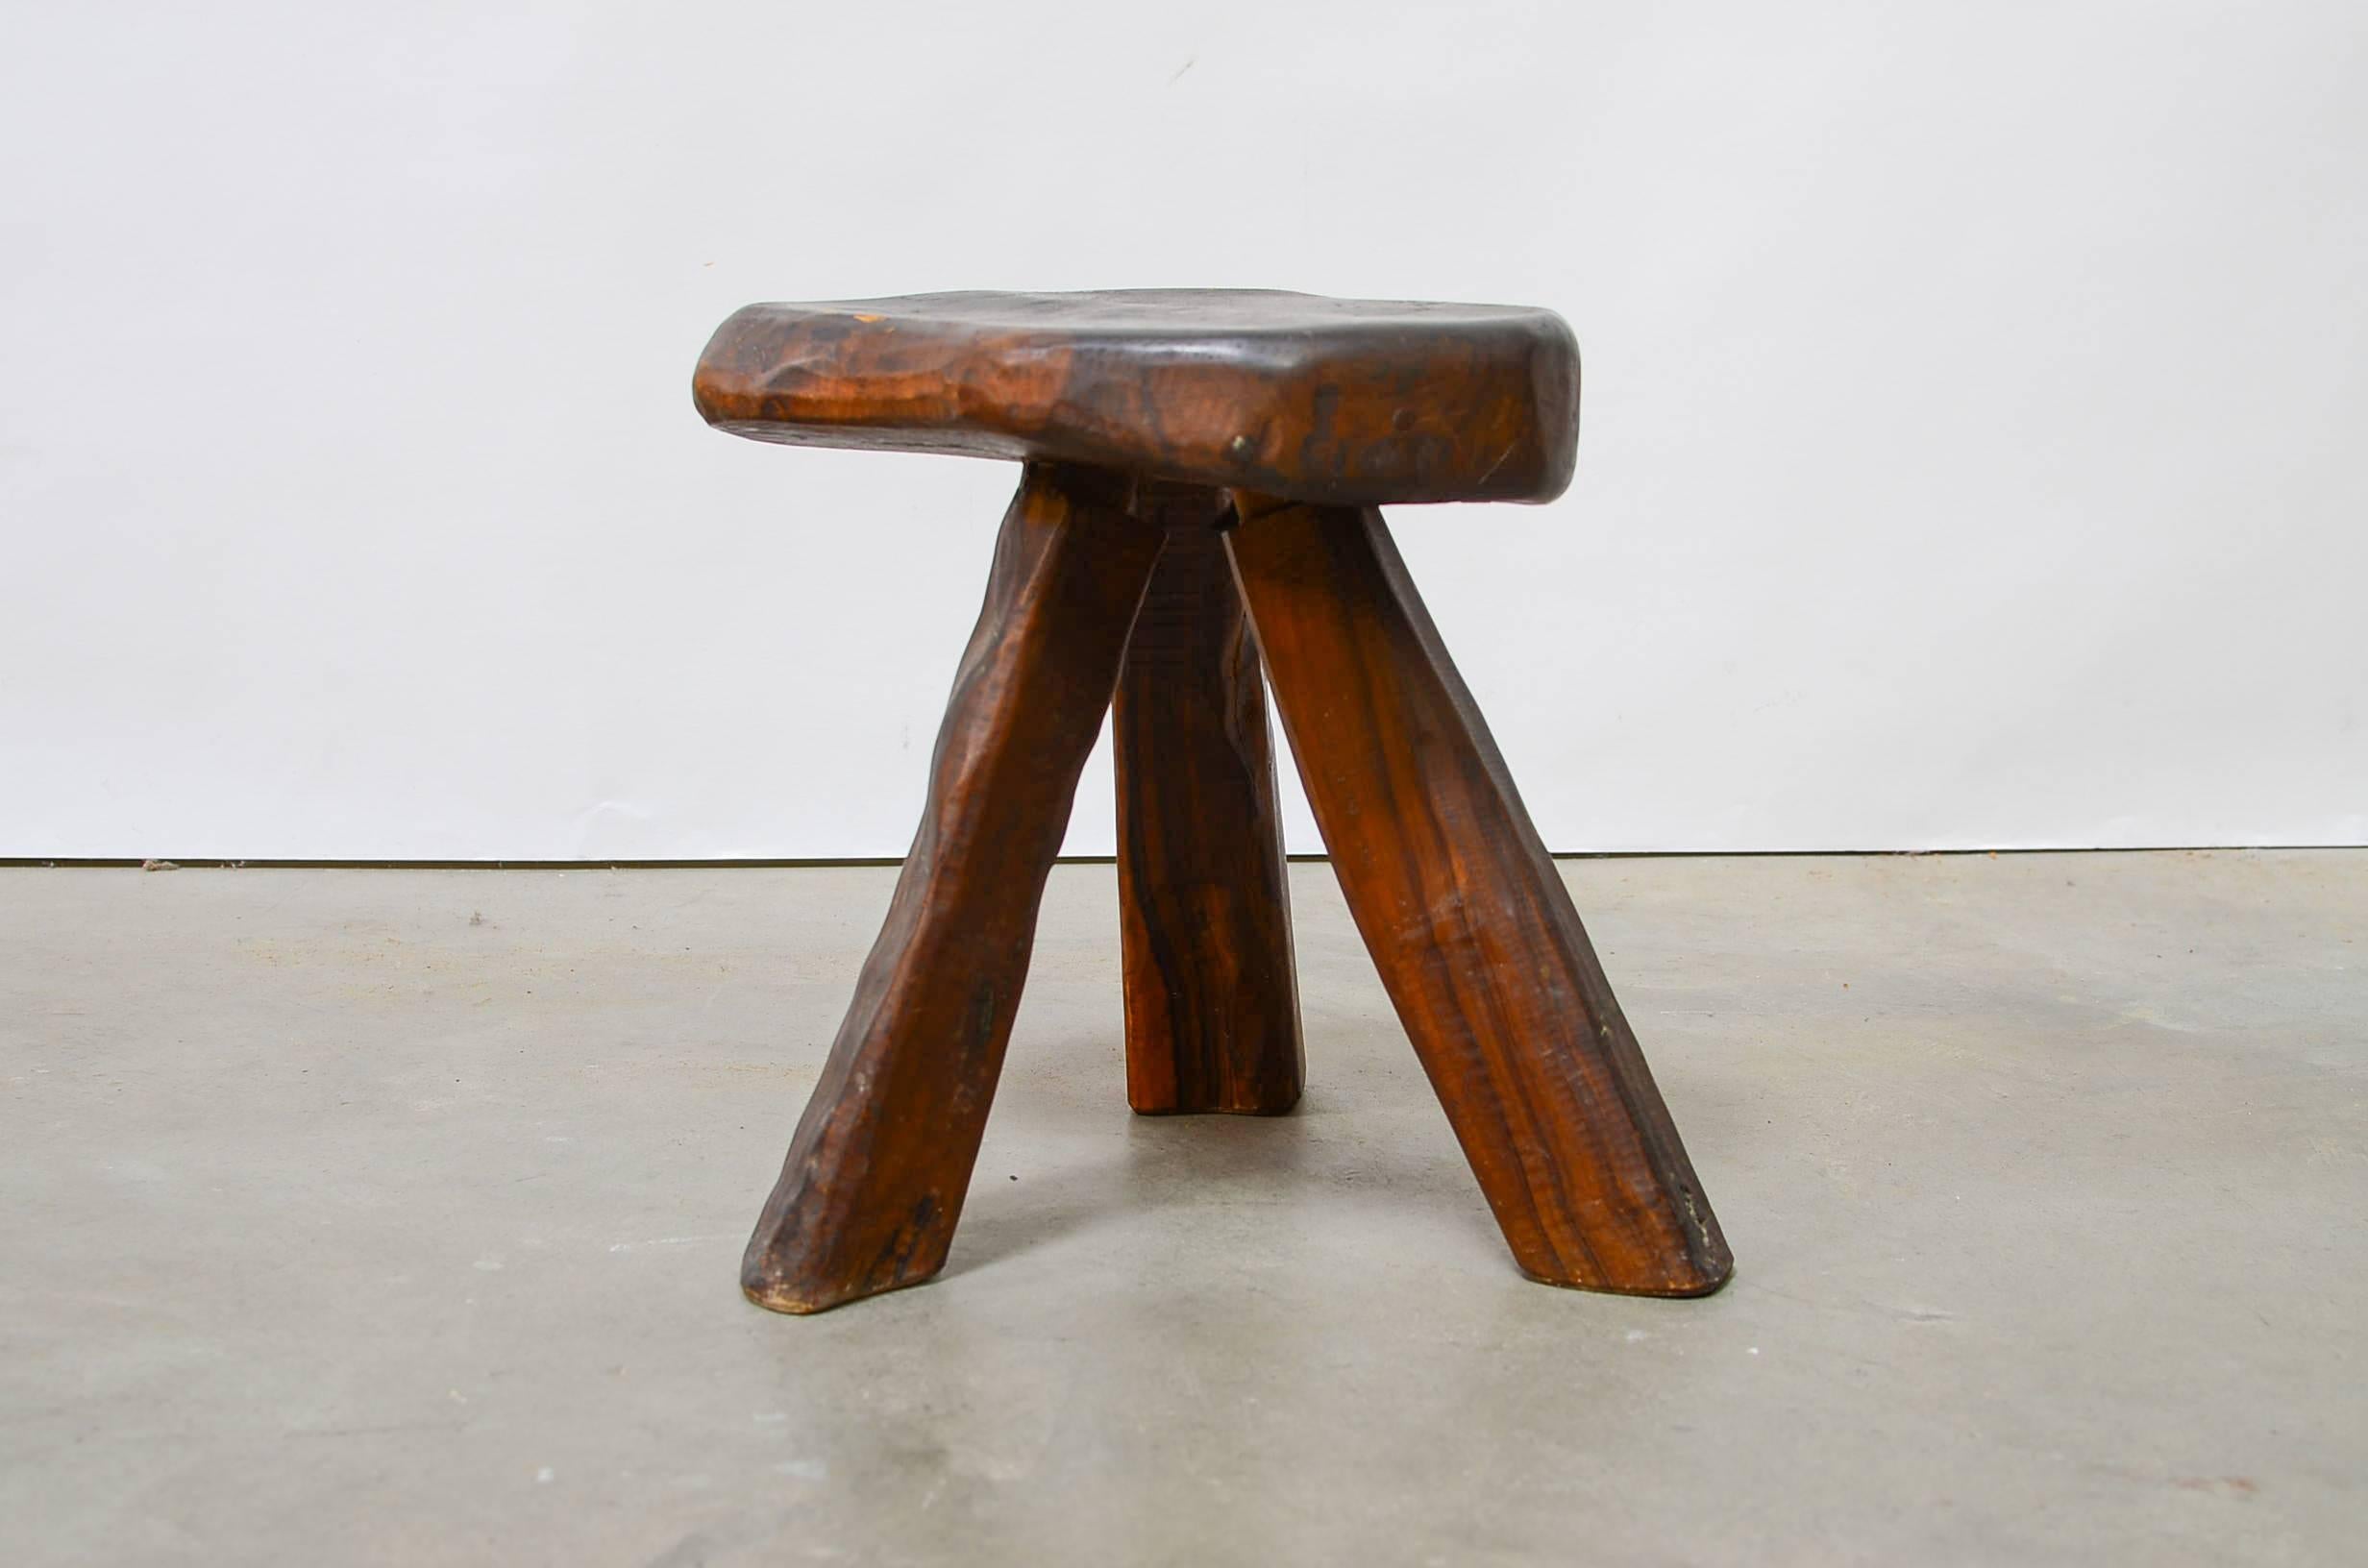 Handsome little French tripod stool in the manner of Alexandre Noll, circa 1950s.